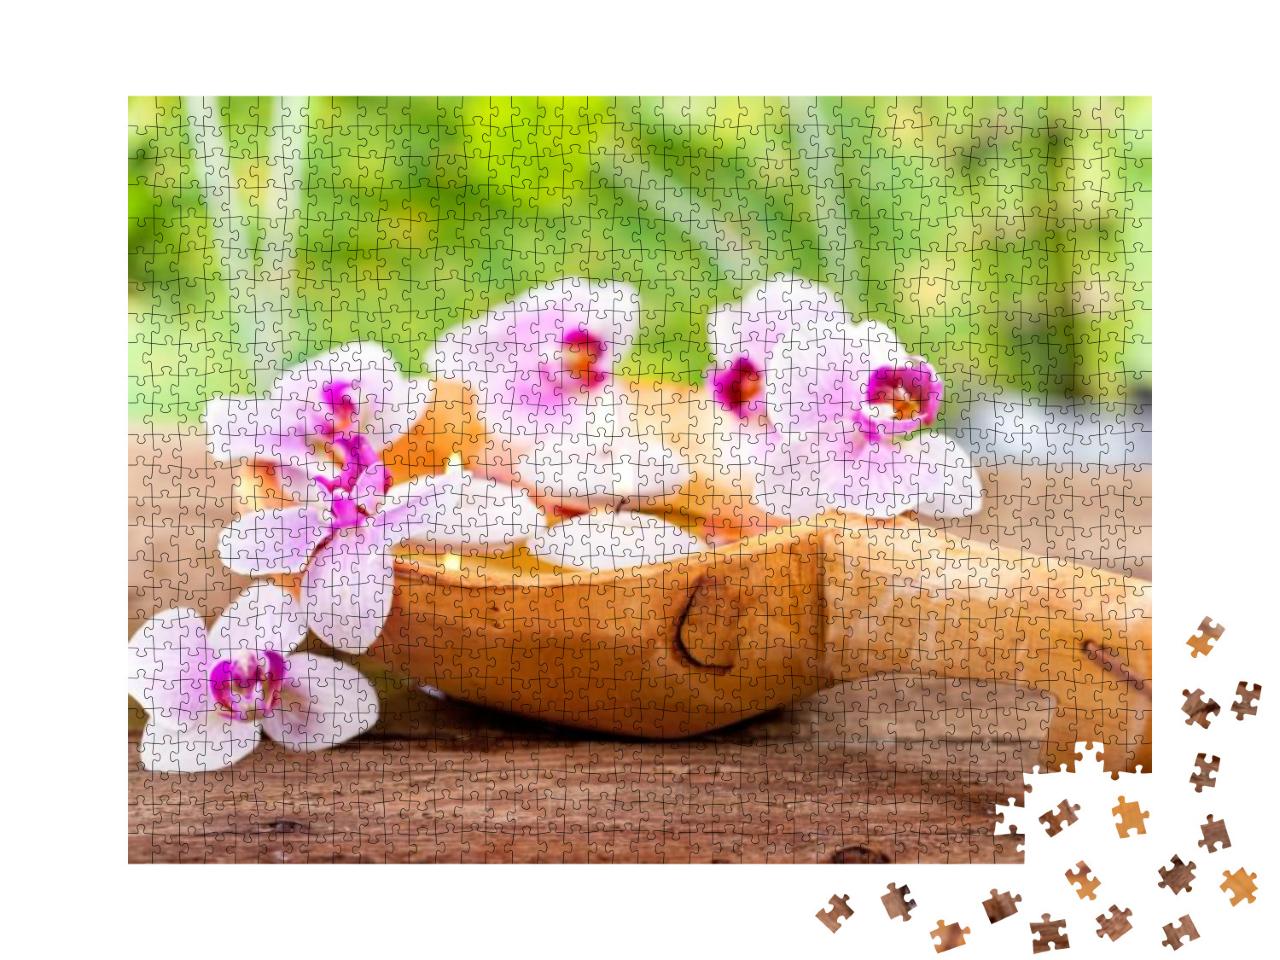 Beauty Purple White Orchid with Candles in a Wooden Scoop... Jigsaw Puzzle with 1000 pieces